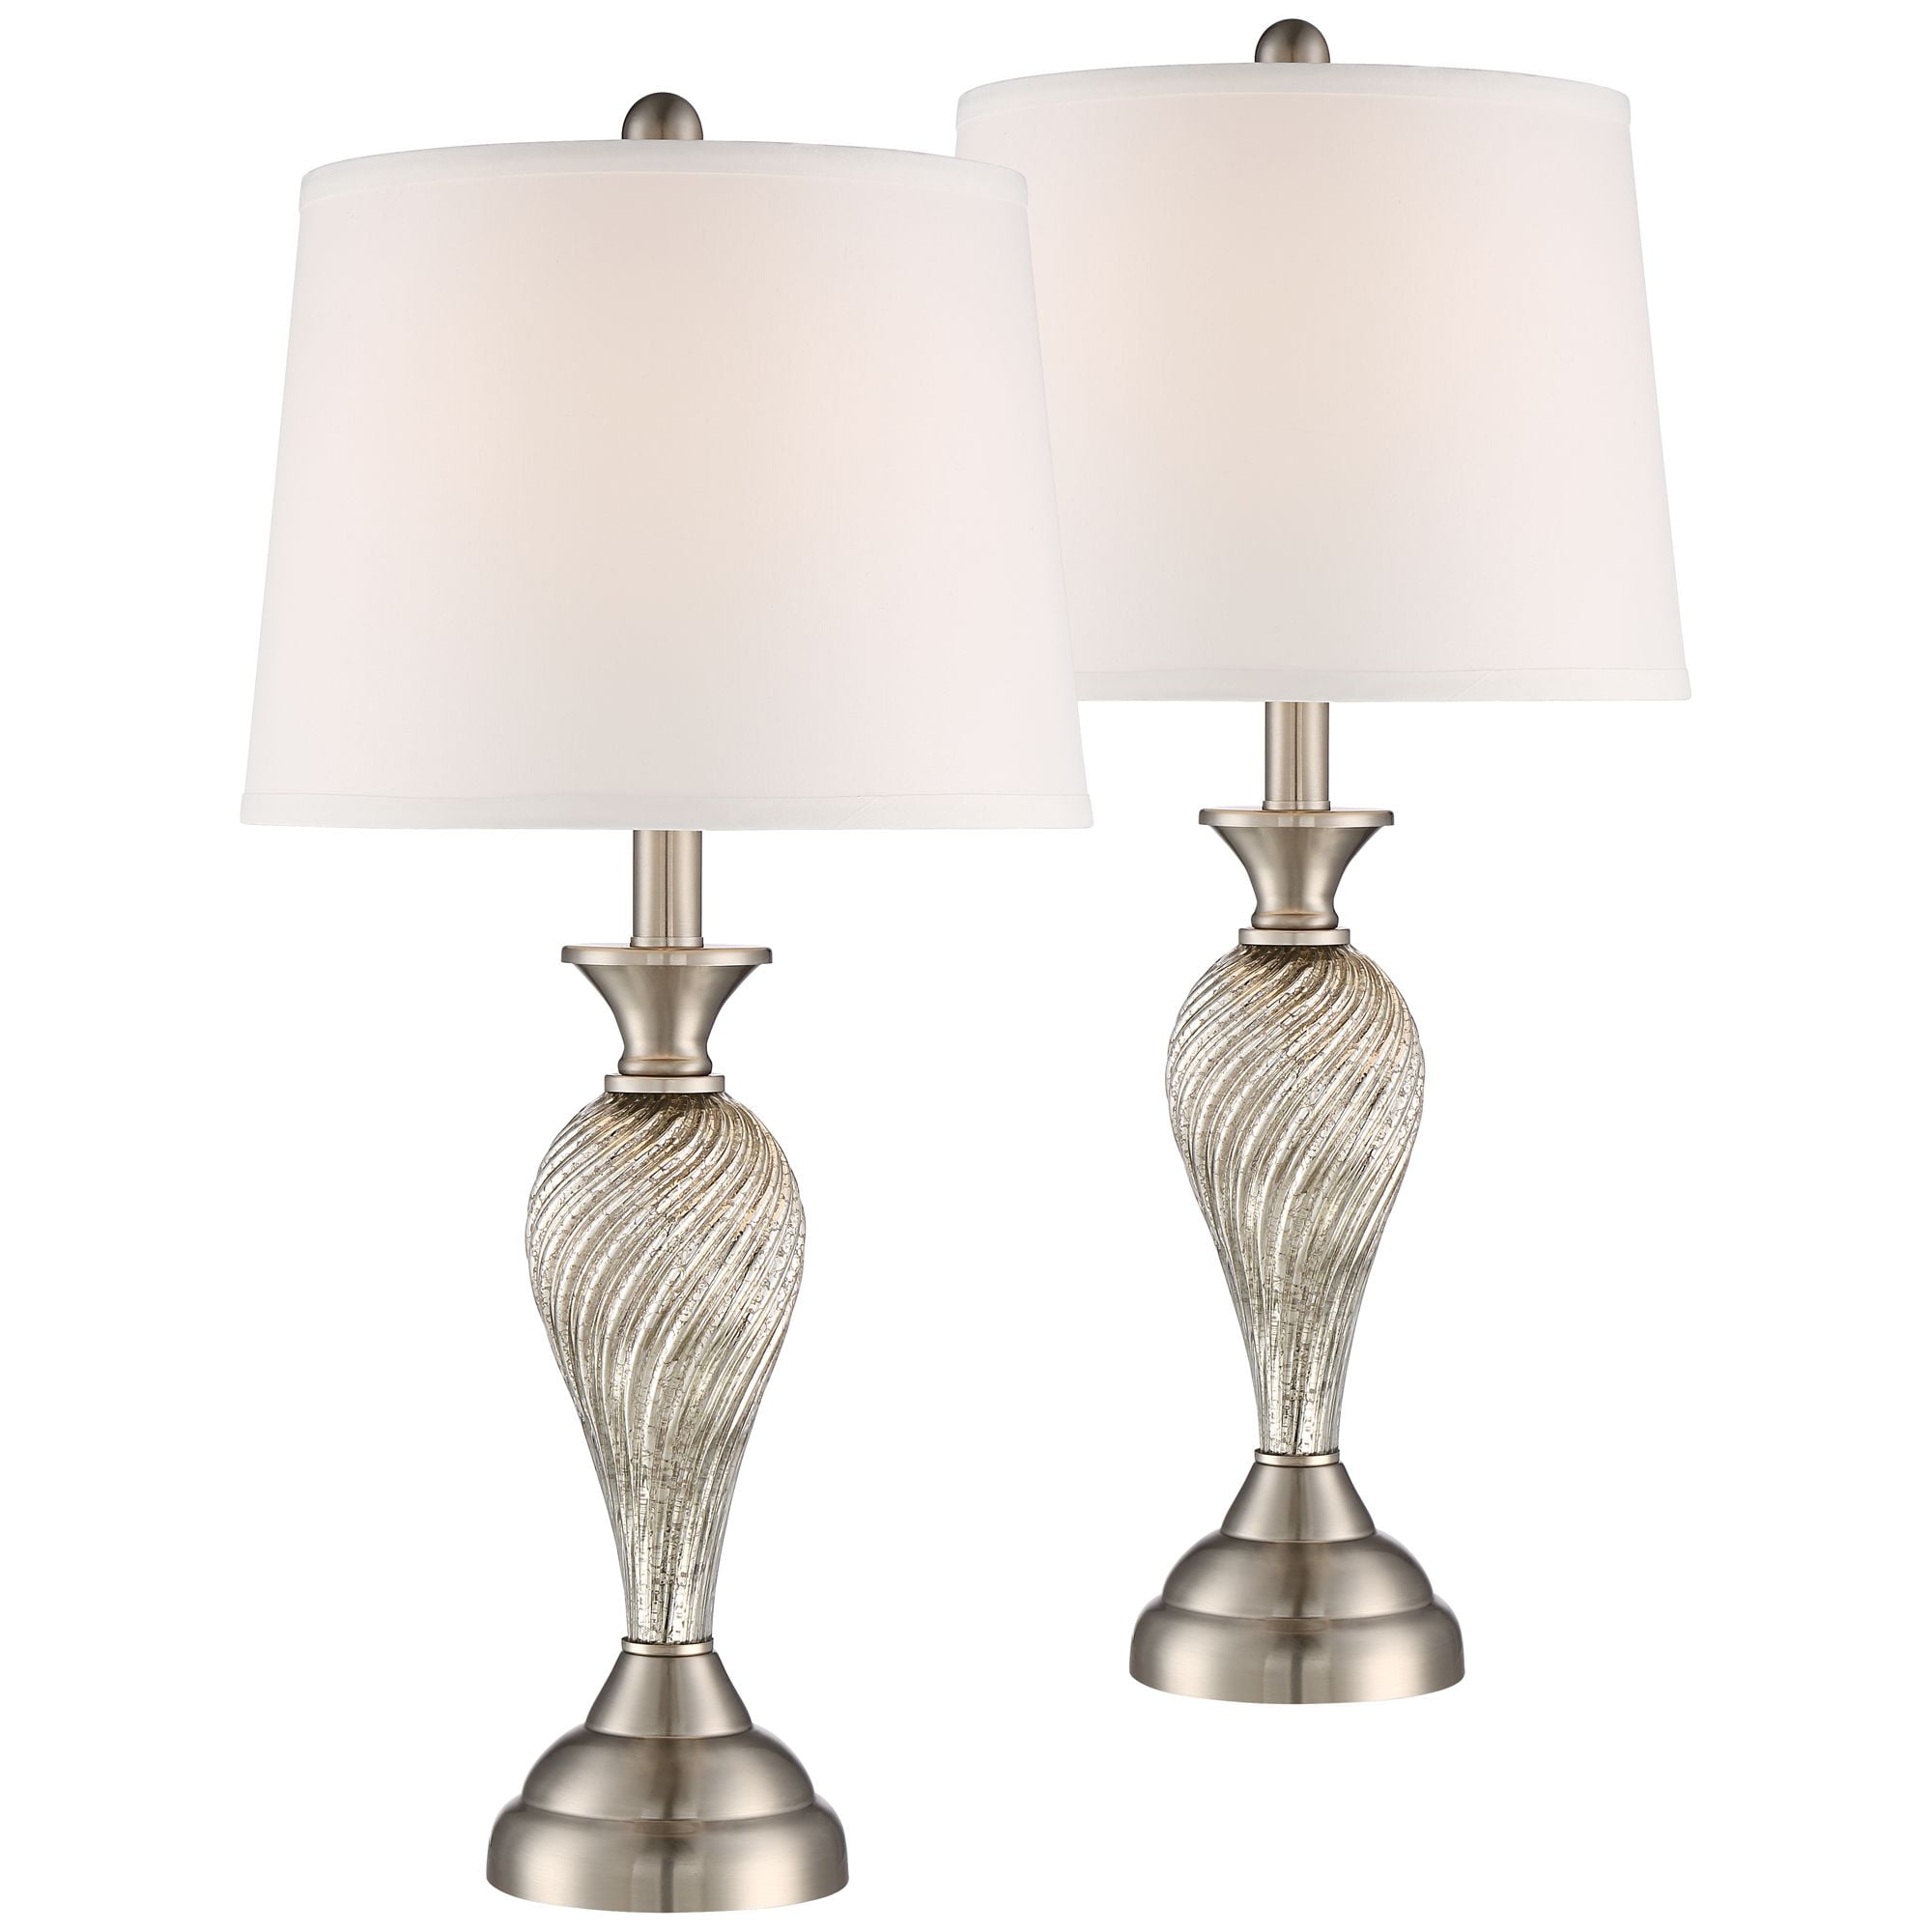 Regency Hill Traditional Table Lamps, High End Table Lamps For Bedroom